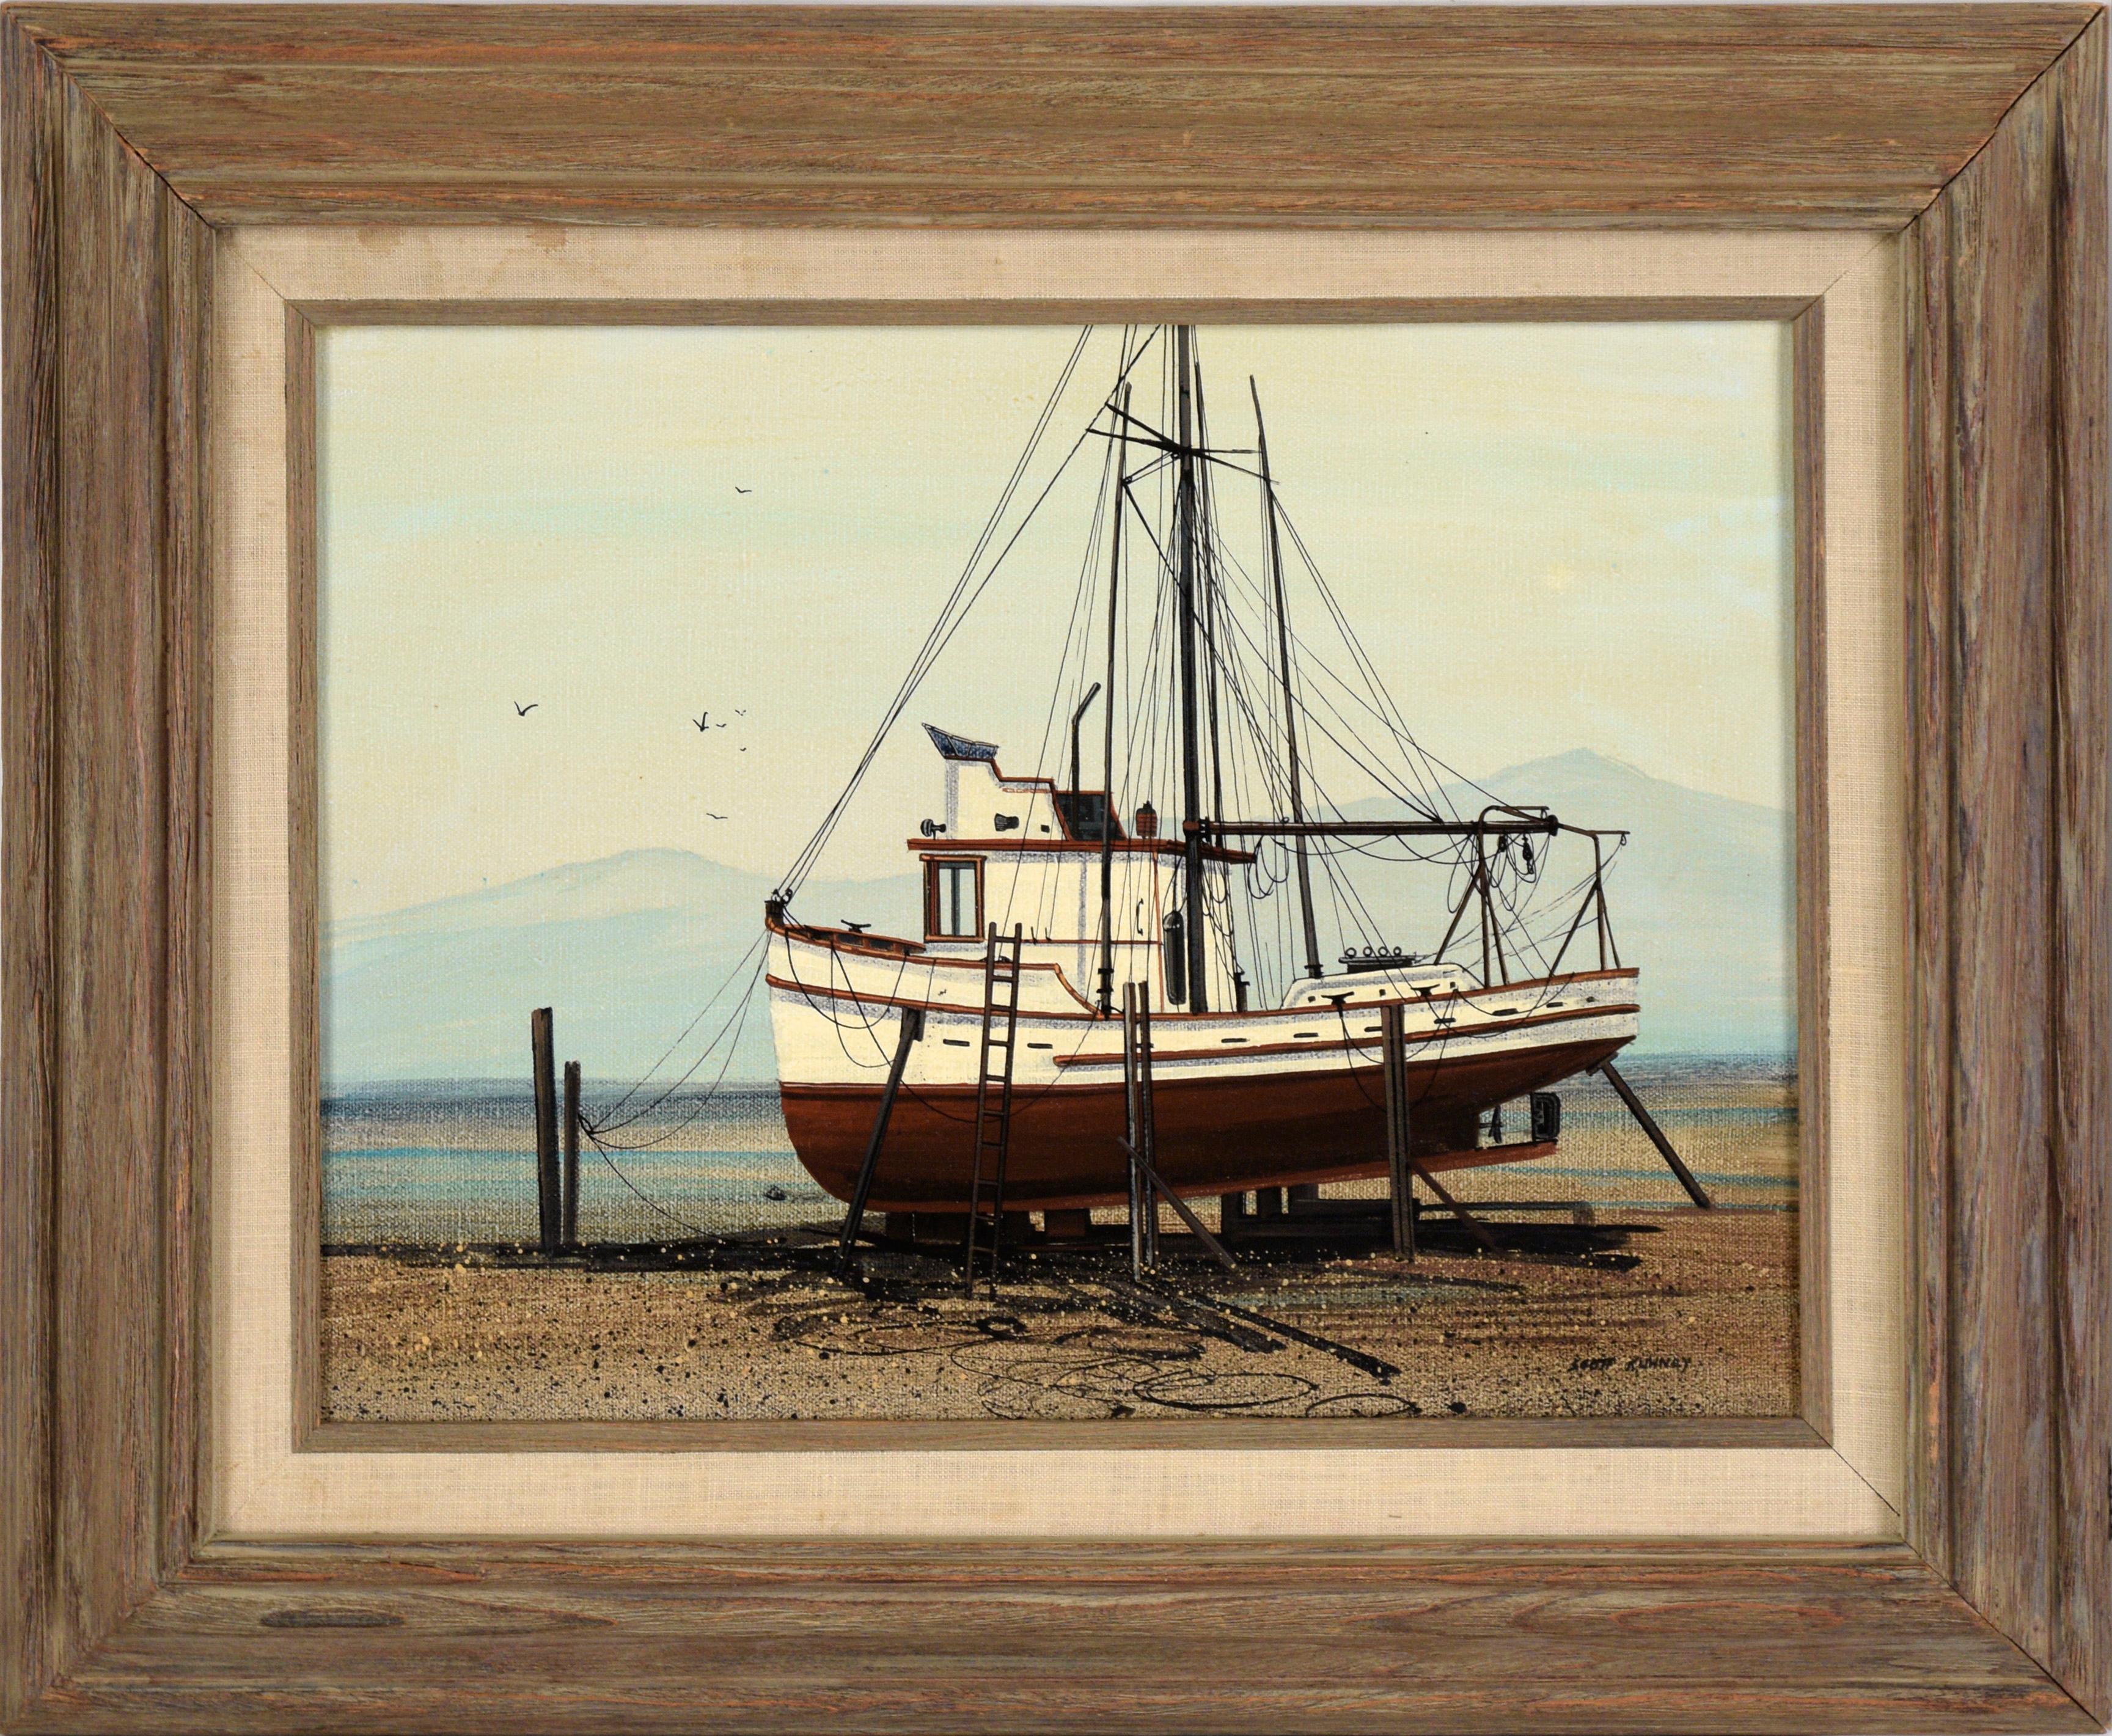 Glenn Scott Kuhnly Landscape Painting - Fishing Boat in Dry Dock at the Shore - Oil on Canvas